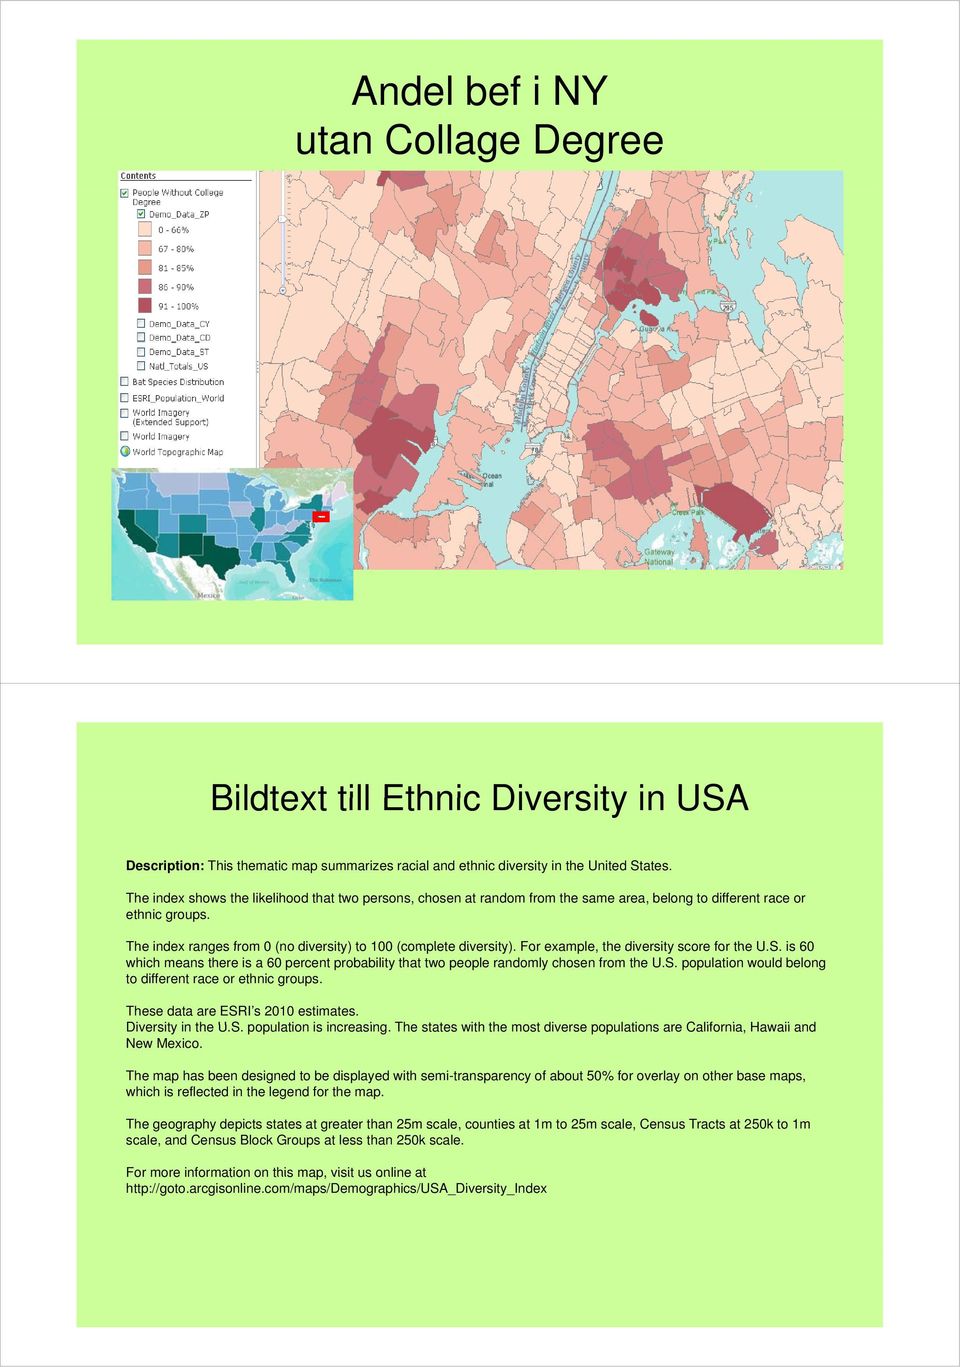 For example, the diversity score for the U.S. is 60 which means there is a 60 percent probability that two people randomly chosen from the U.S. population would belong to different race or ethnic groups.